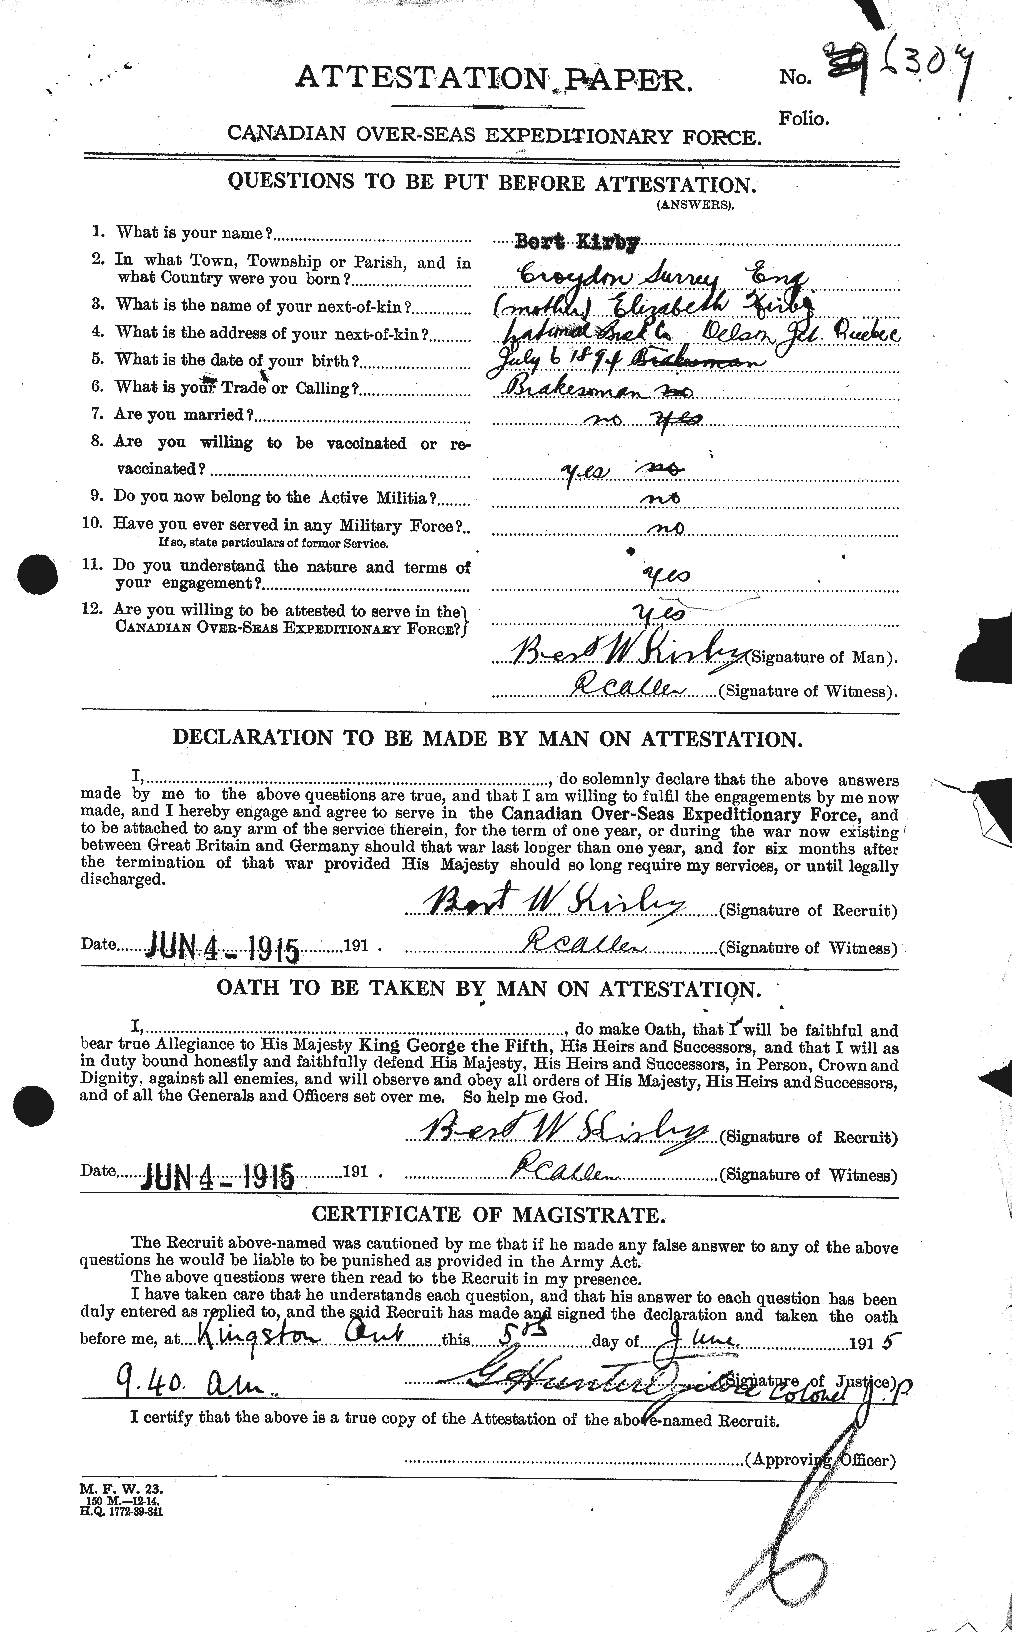 Personnel Records of the First World War - CEF 437160a